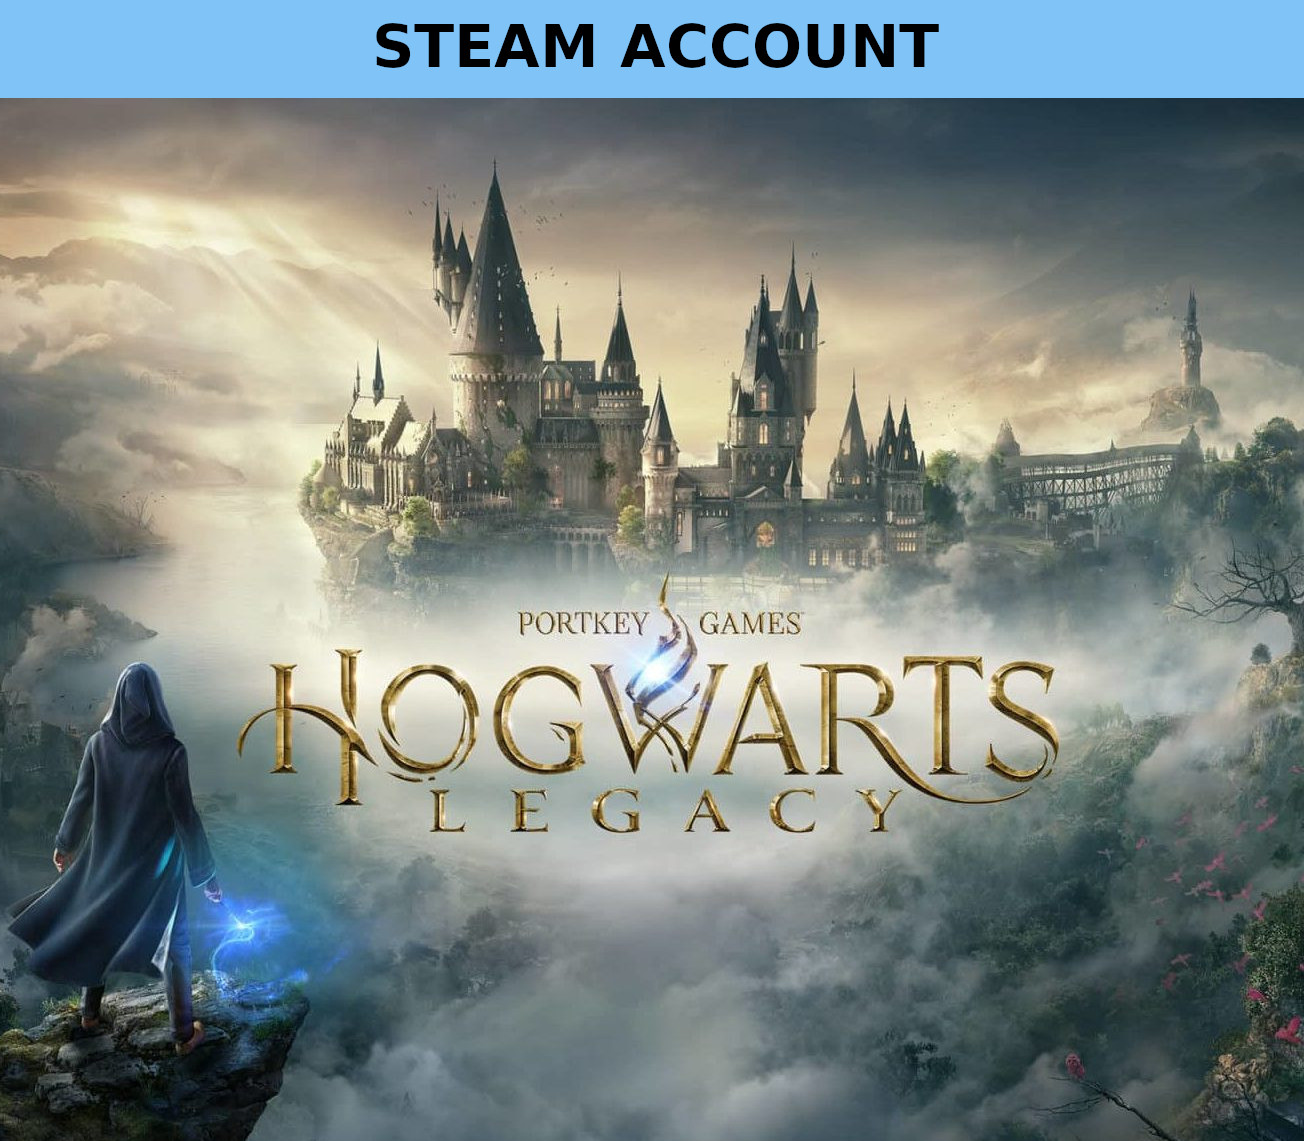 Hogwarts Legacy Steam Accounts Global |Fast Delivery| Buy Hogwarts Steam Account with Crypto USDT Bitcoin Ethereum Litecoin Payeer BNB Tron - 1stpal.com